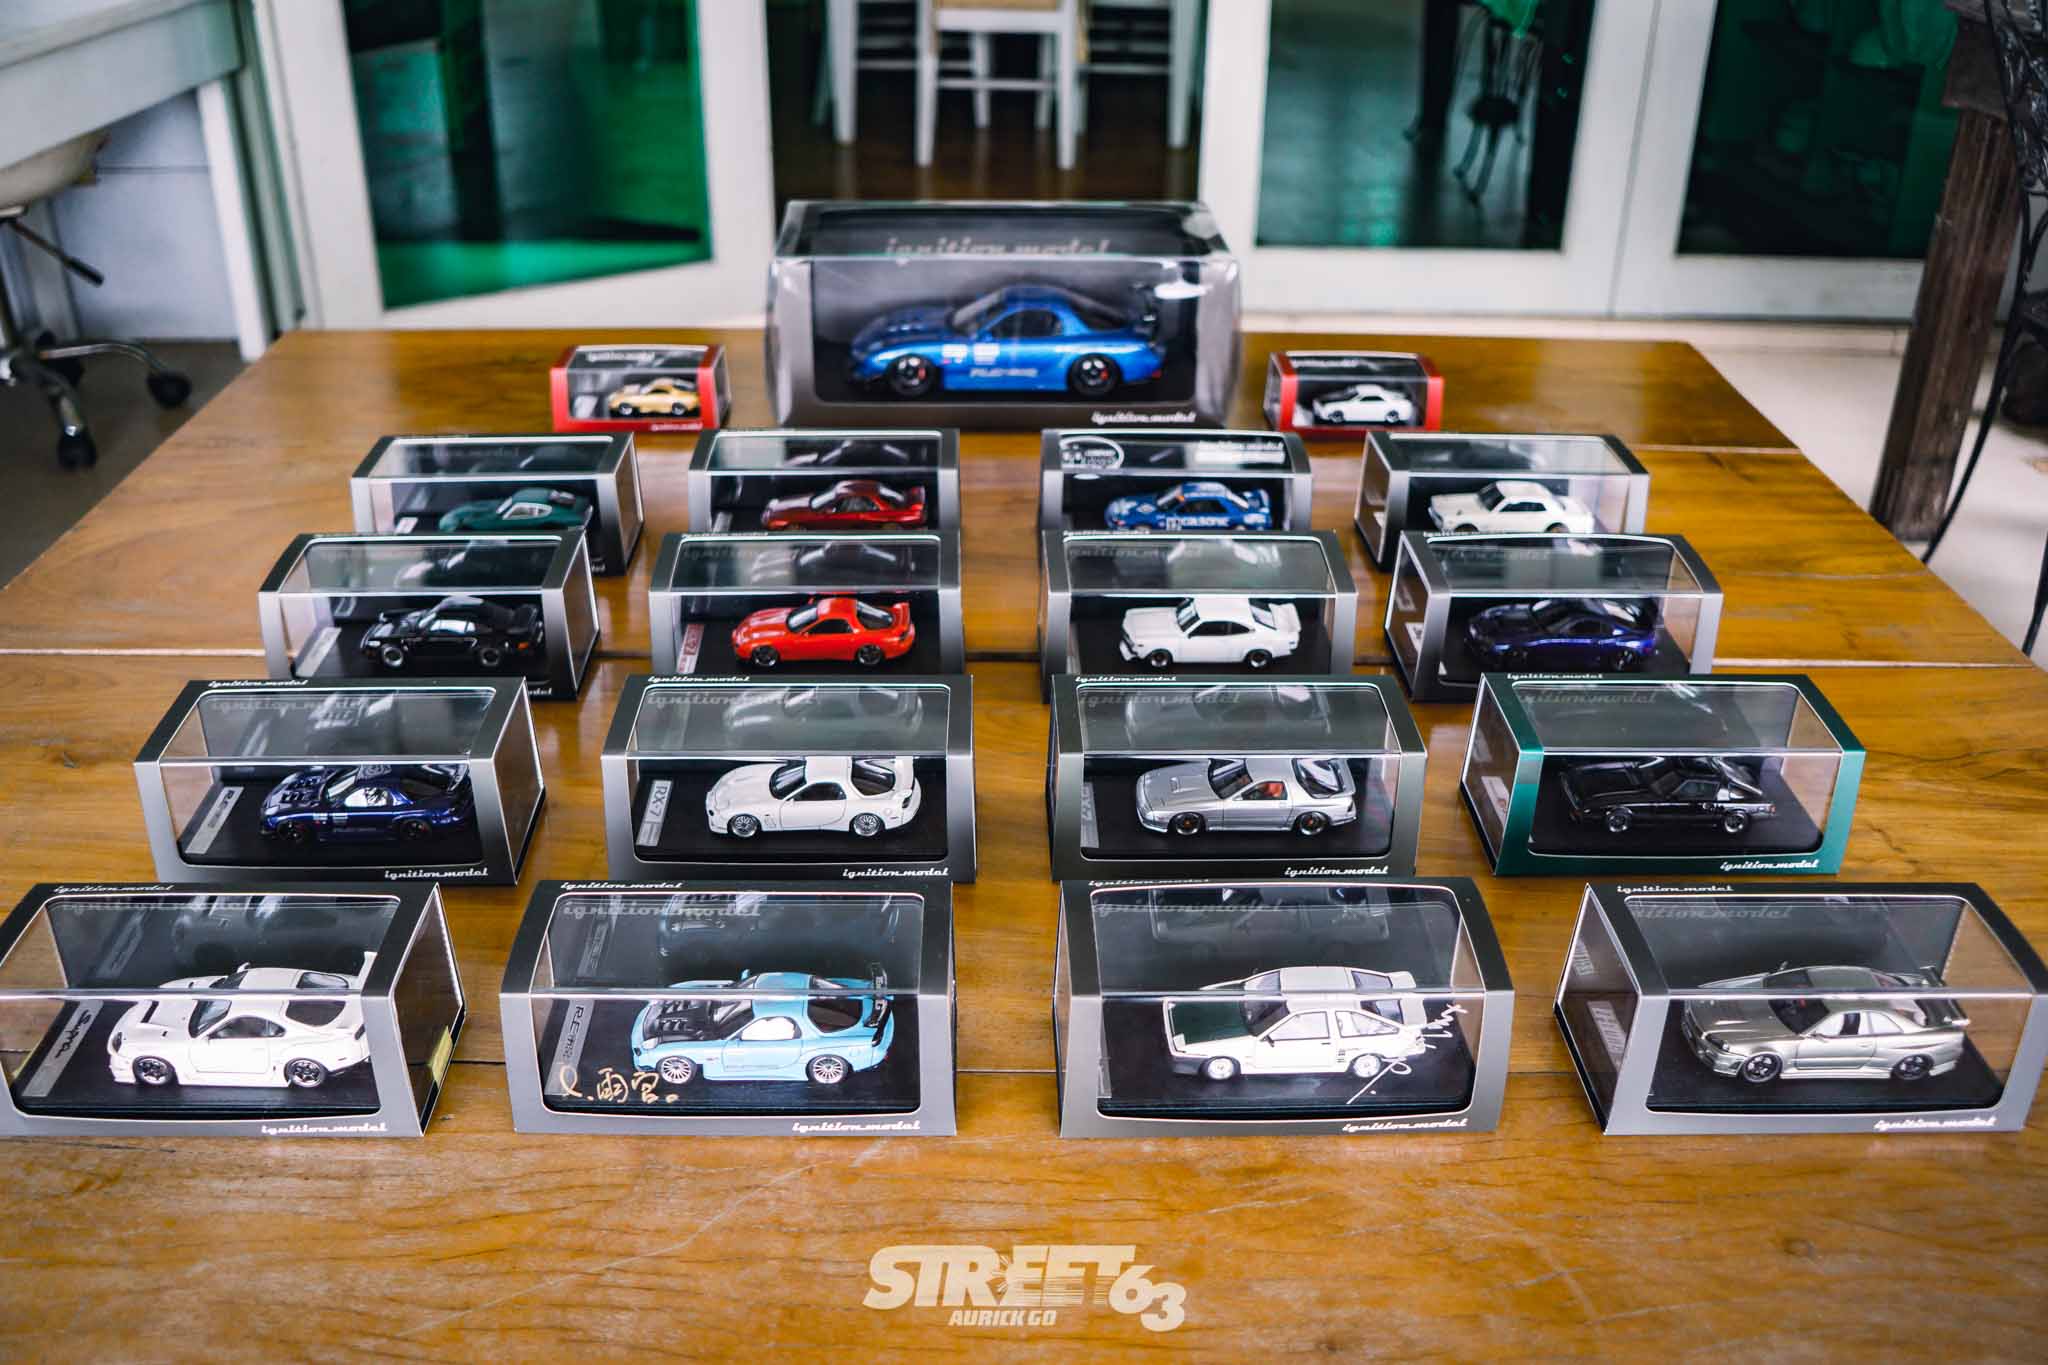 Mini63: The Street63 Diecast Collection 6